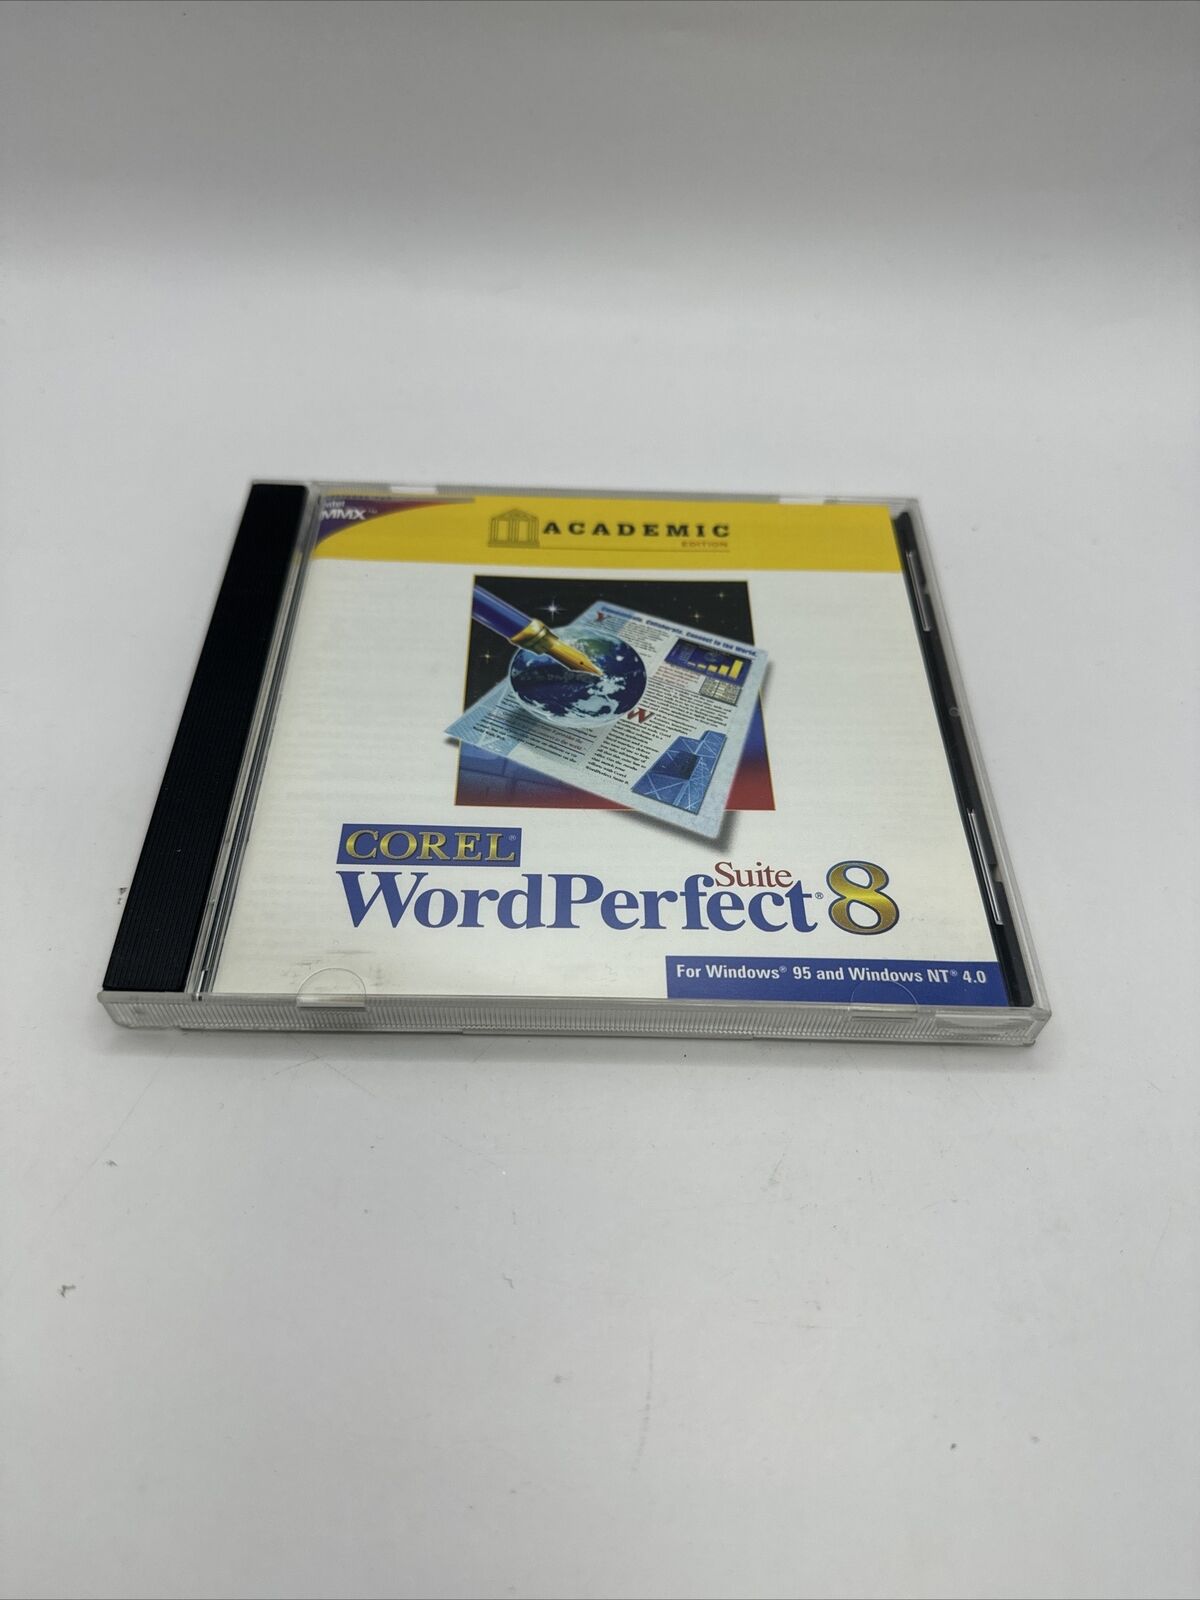 WordPerfect office suite 8 for windows 95 H6